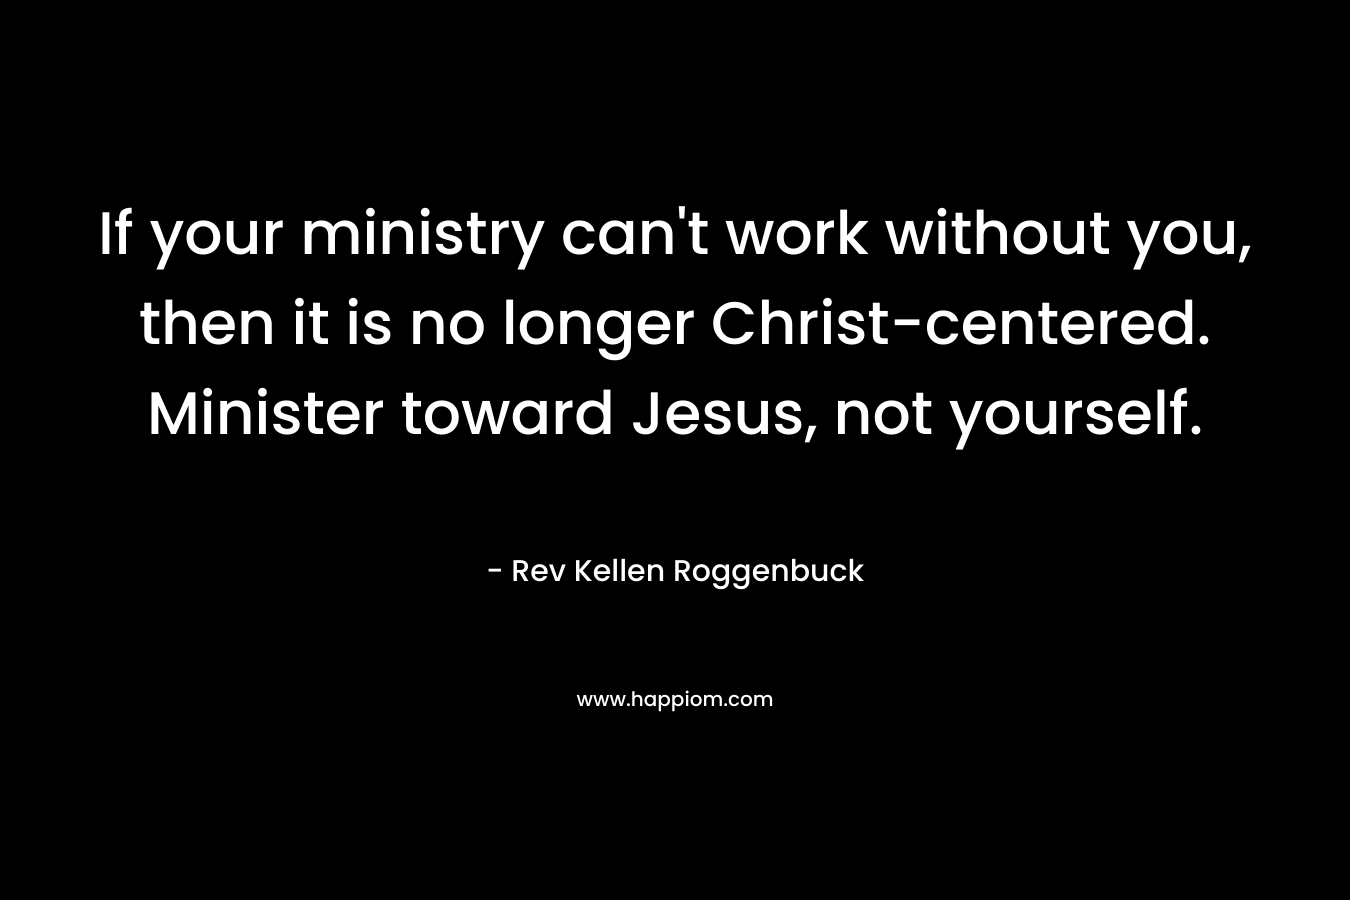 If your ministry can't work without you, then it is no longer Christ-centered. Minister toward Jesus, not yourself.